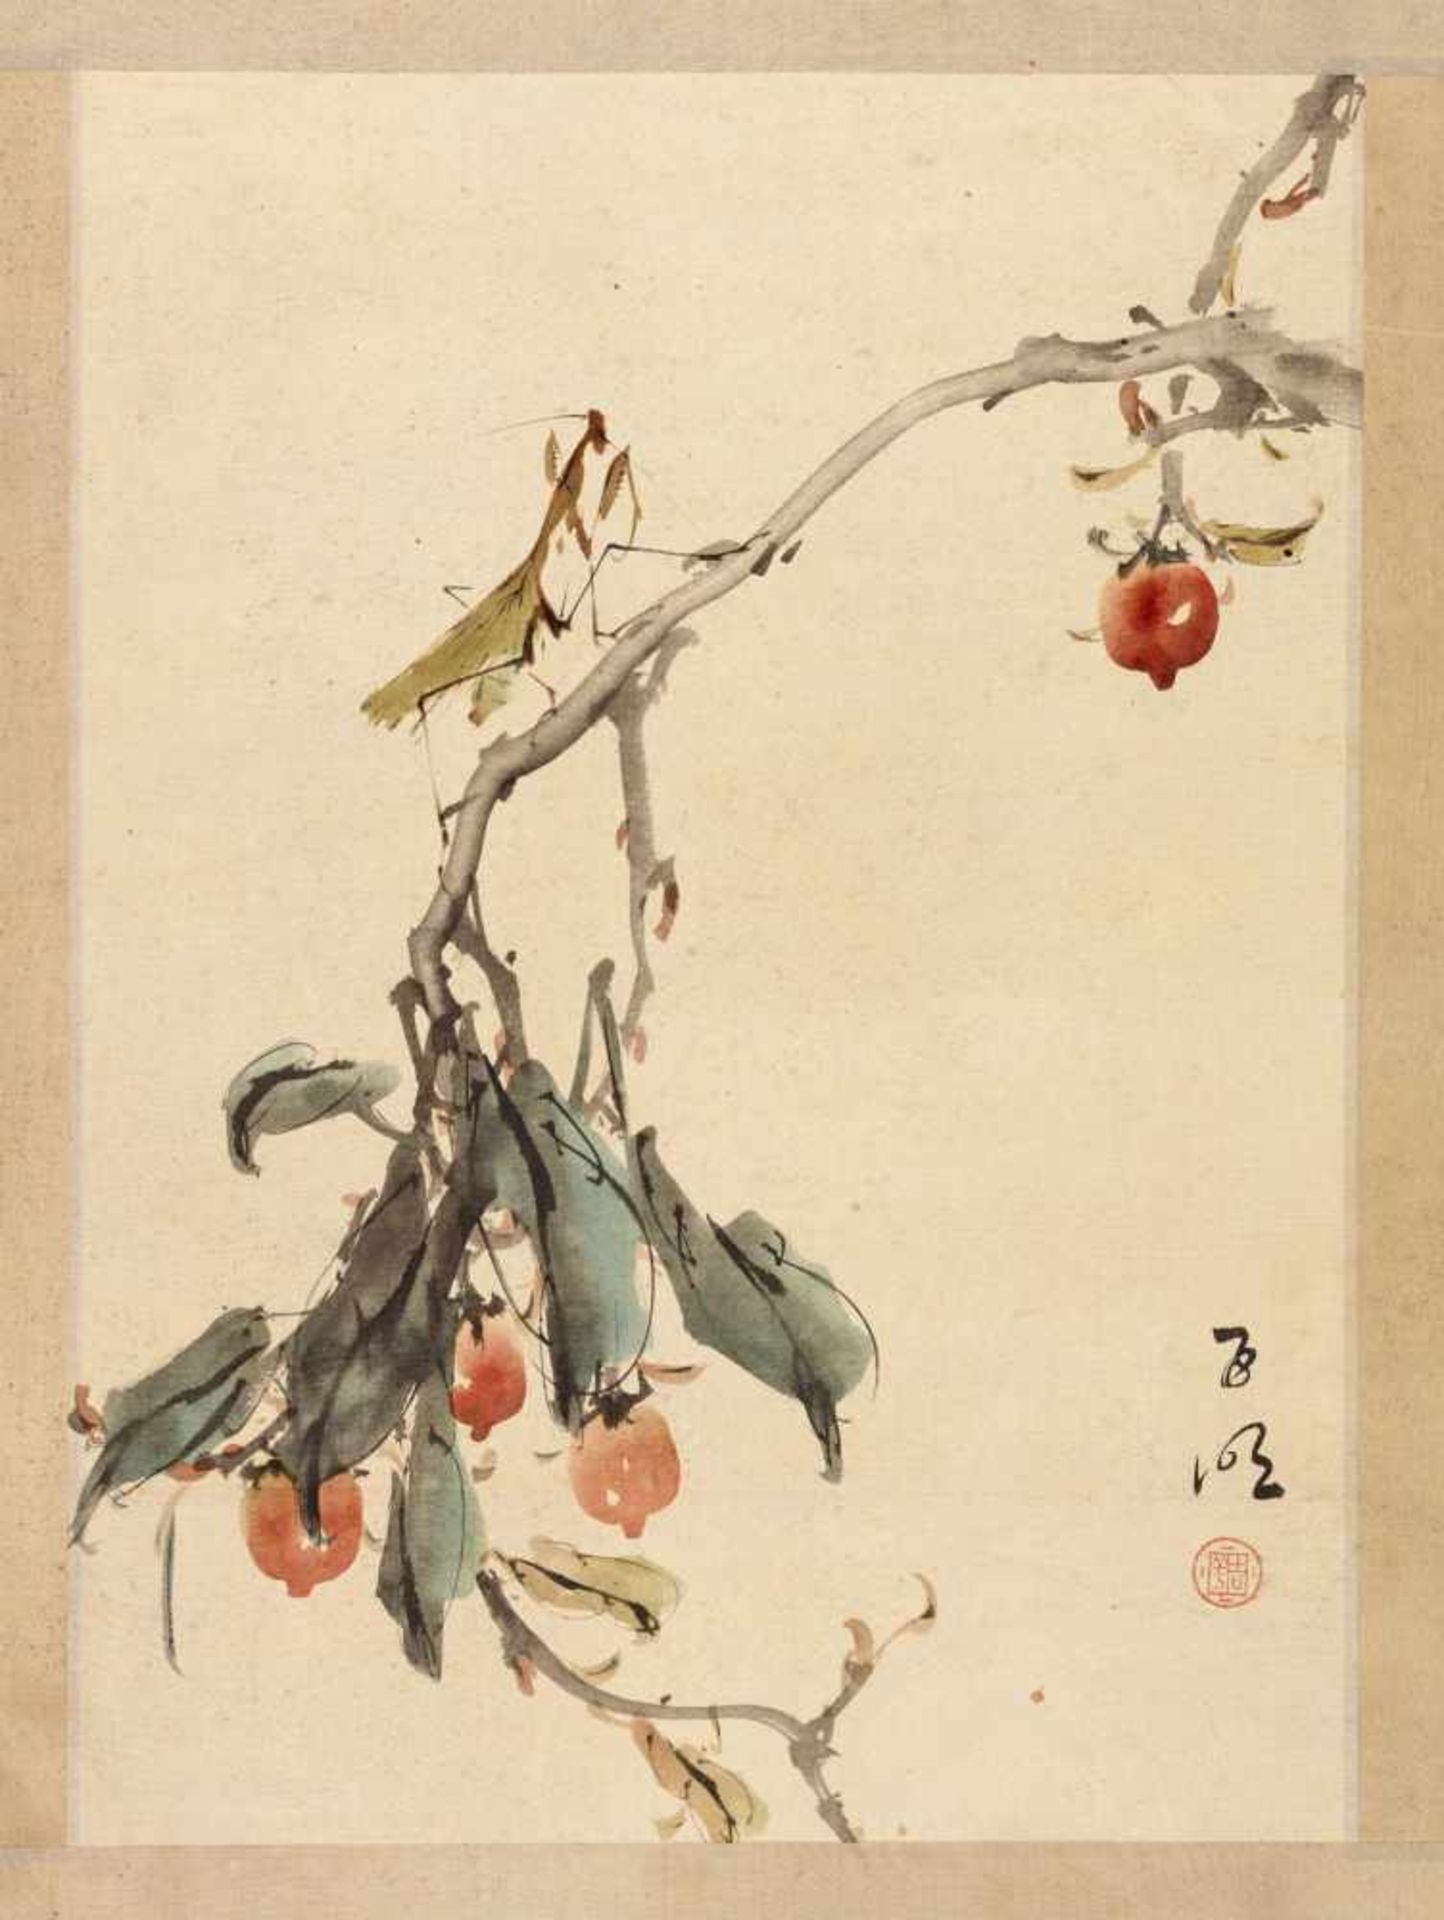 A PAINTING WITH A MANTIS ON A FRUITING BRANCH OF POMEGRANATEInk and colors on paper. Japan, 19th